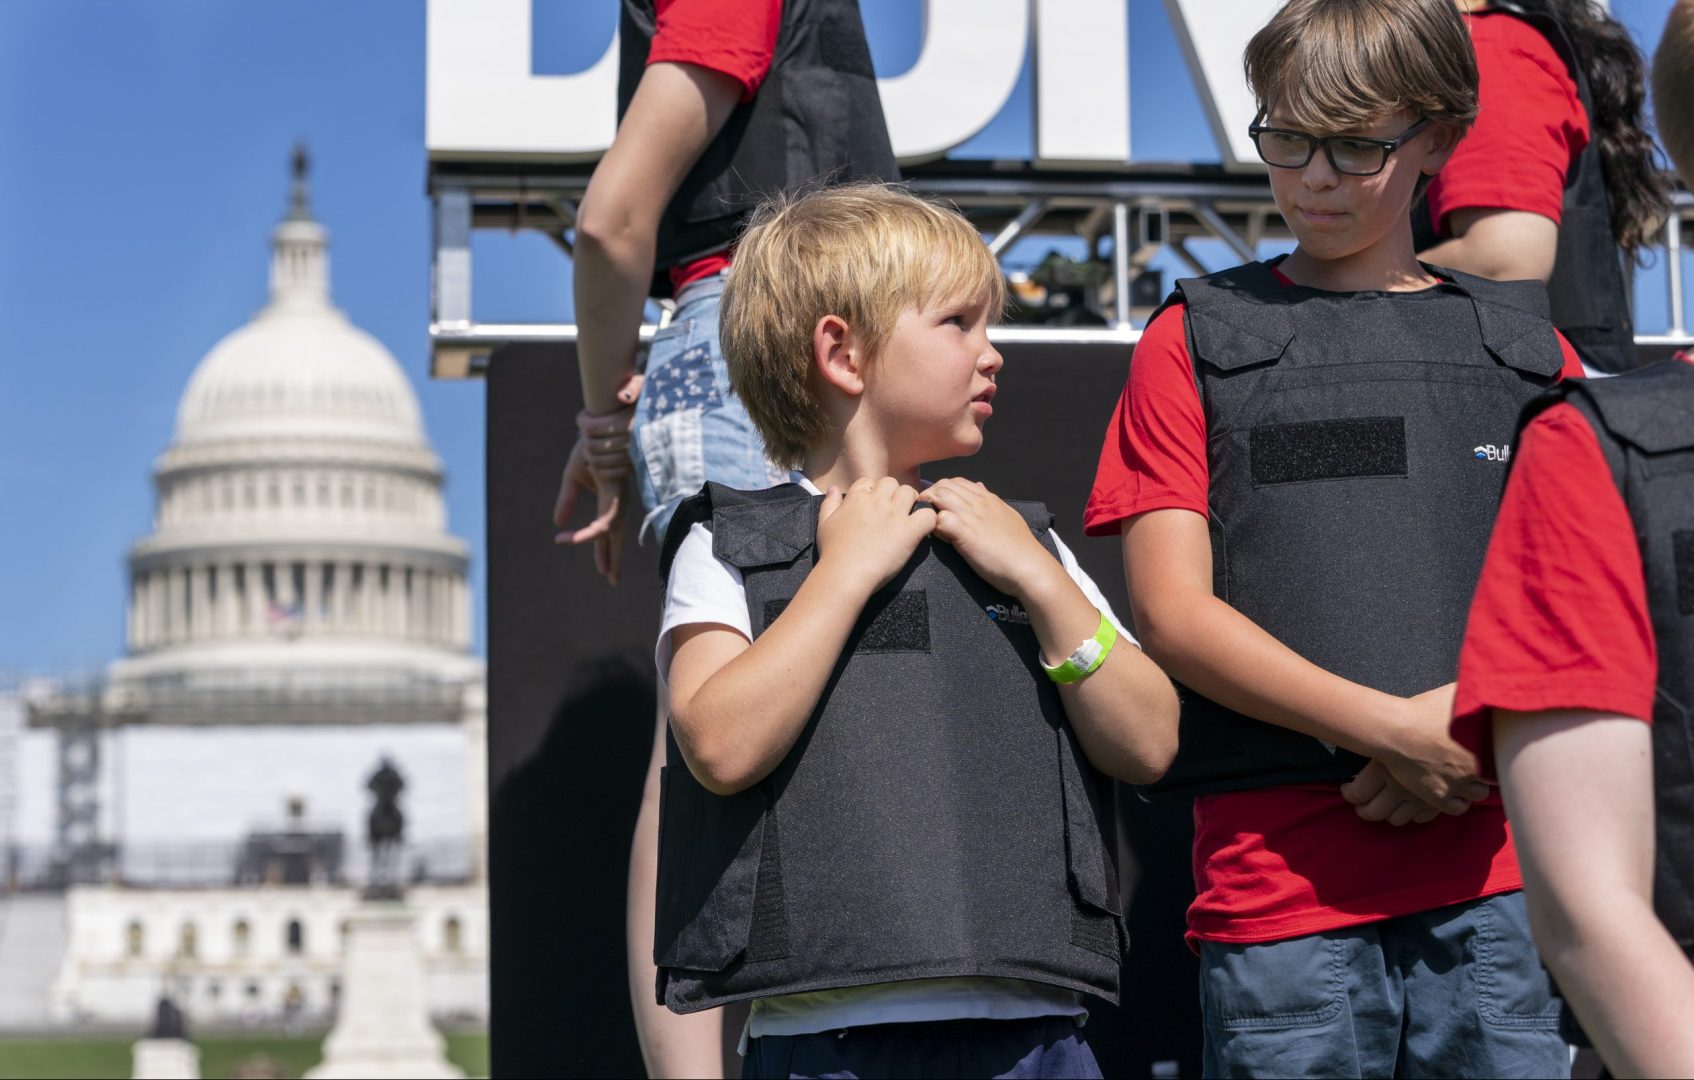 Wearing body armor, Jacob Kelly, 6, talks with Cal Neaville, 11, right, during a gun safety reform rally, Monday, June 6, 2022, outside the U.S. Capitol in Washington. 